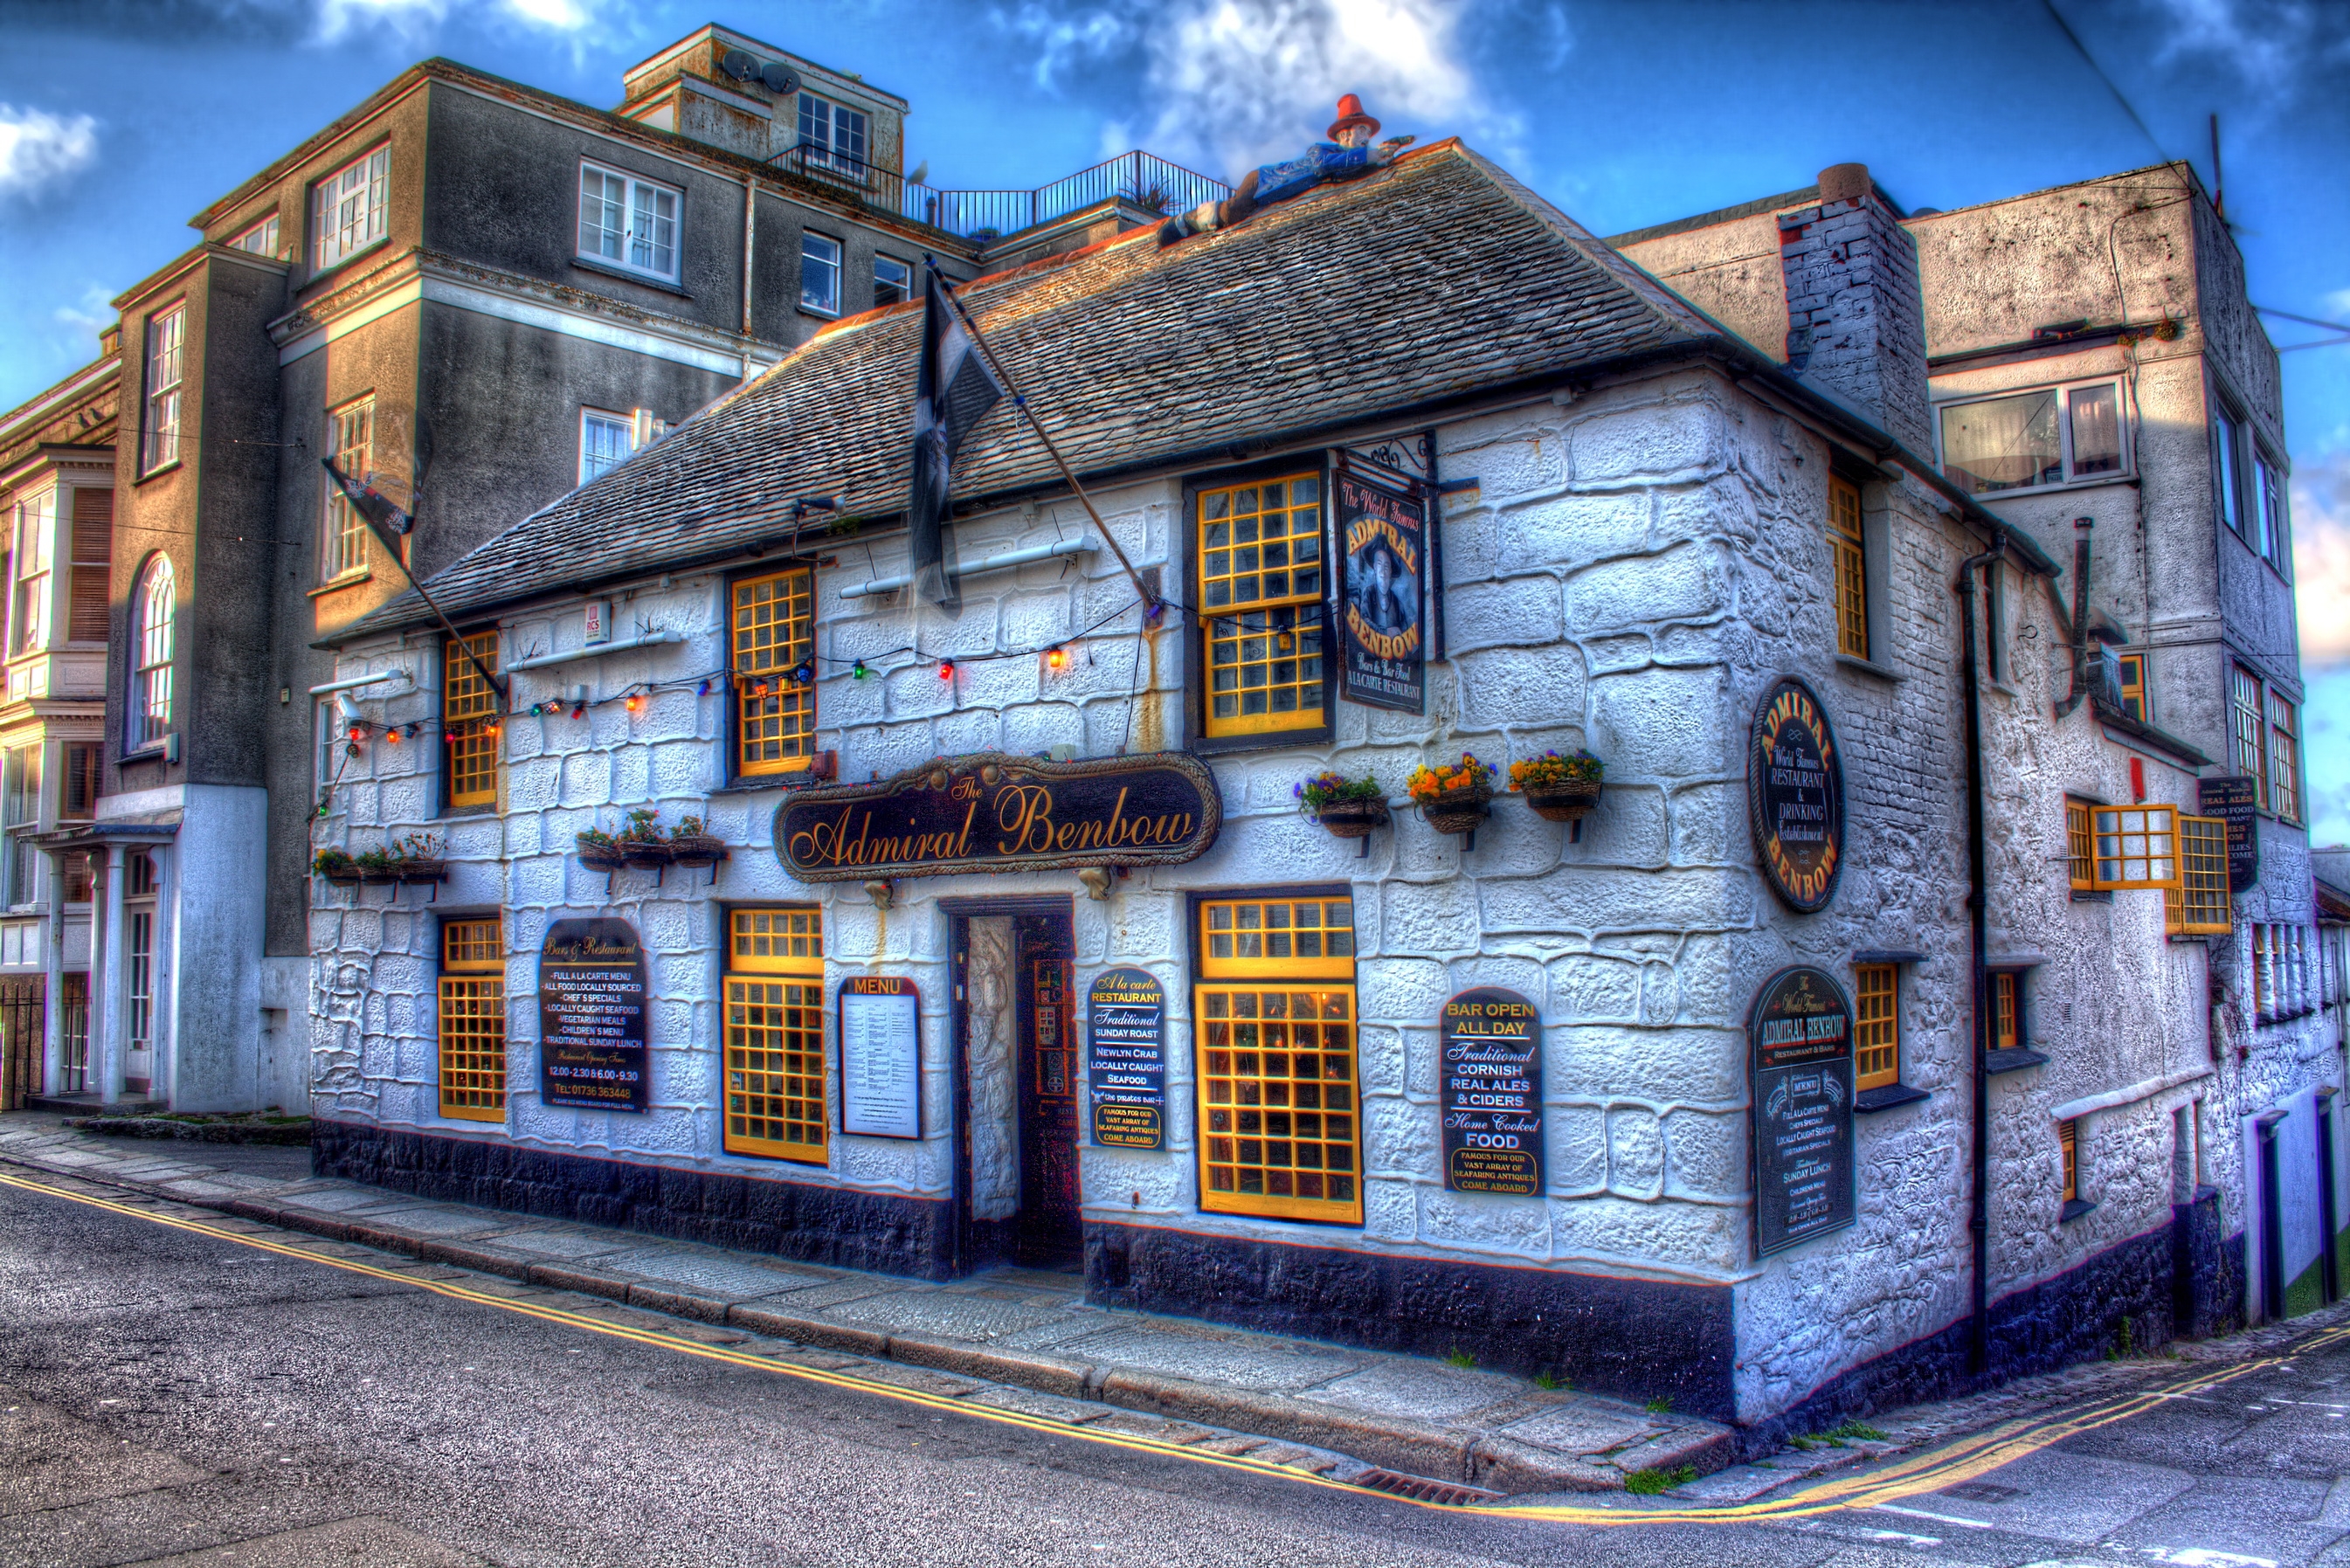 cities, great britain, hdr, united kingdom, england, tavern, admiral benbow, penzance 1080p